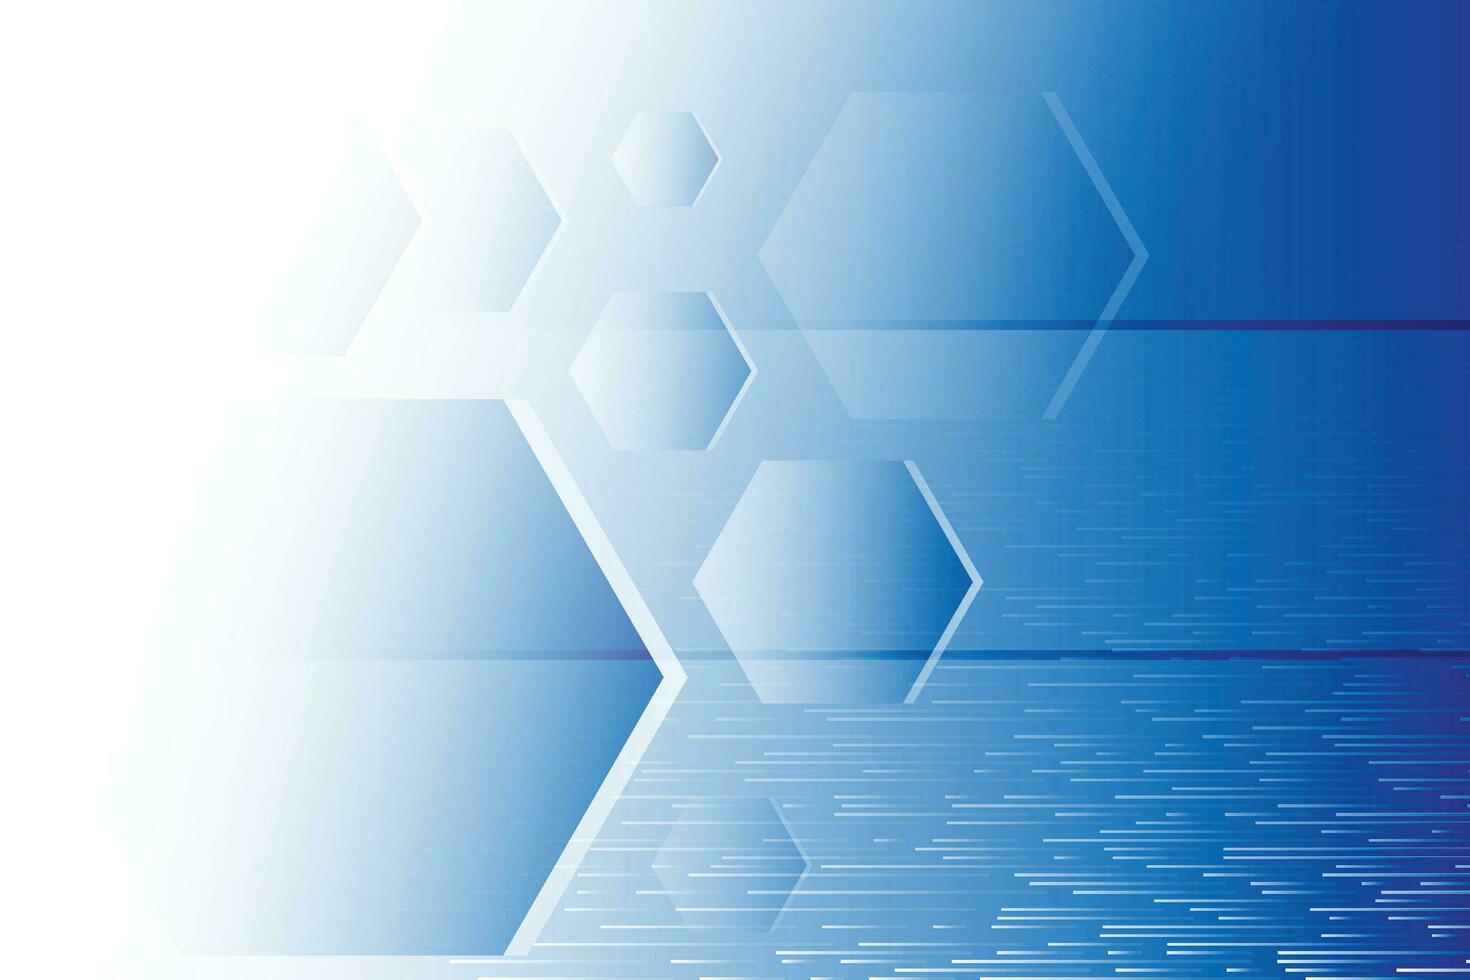 Abstract blue and white technology background with hexagonal shape. Vector illustration.